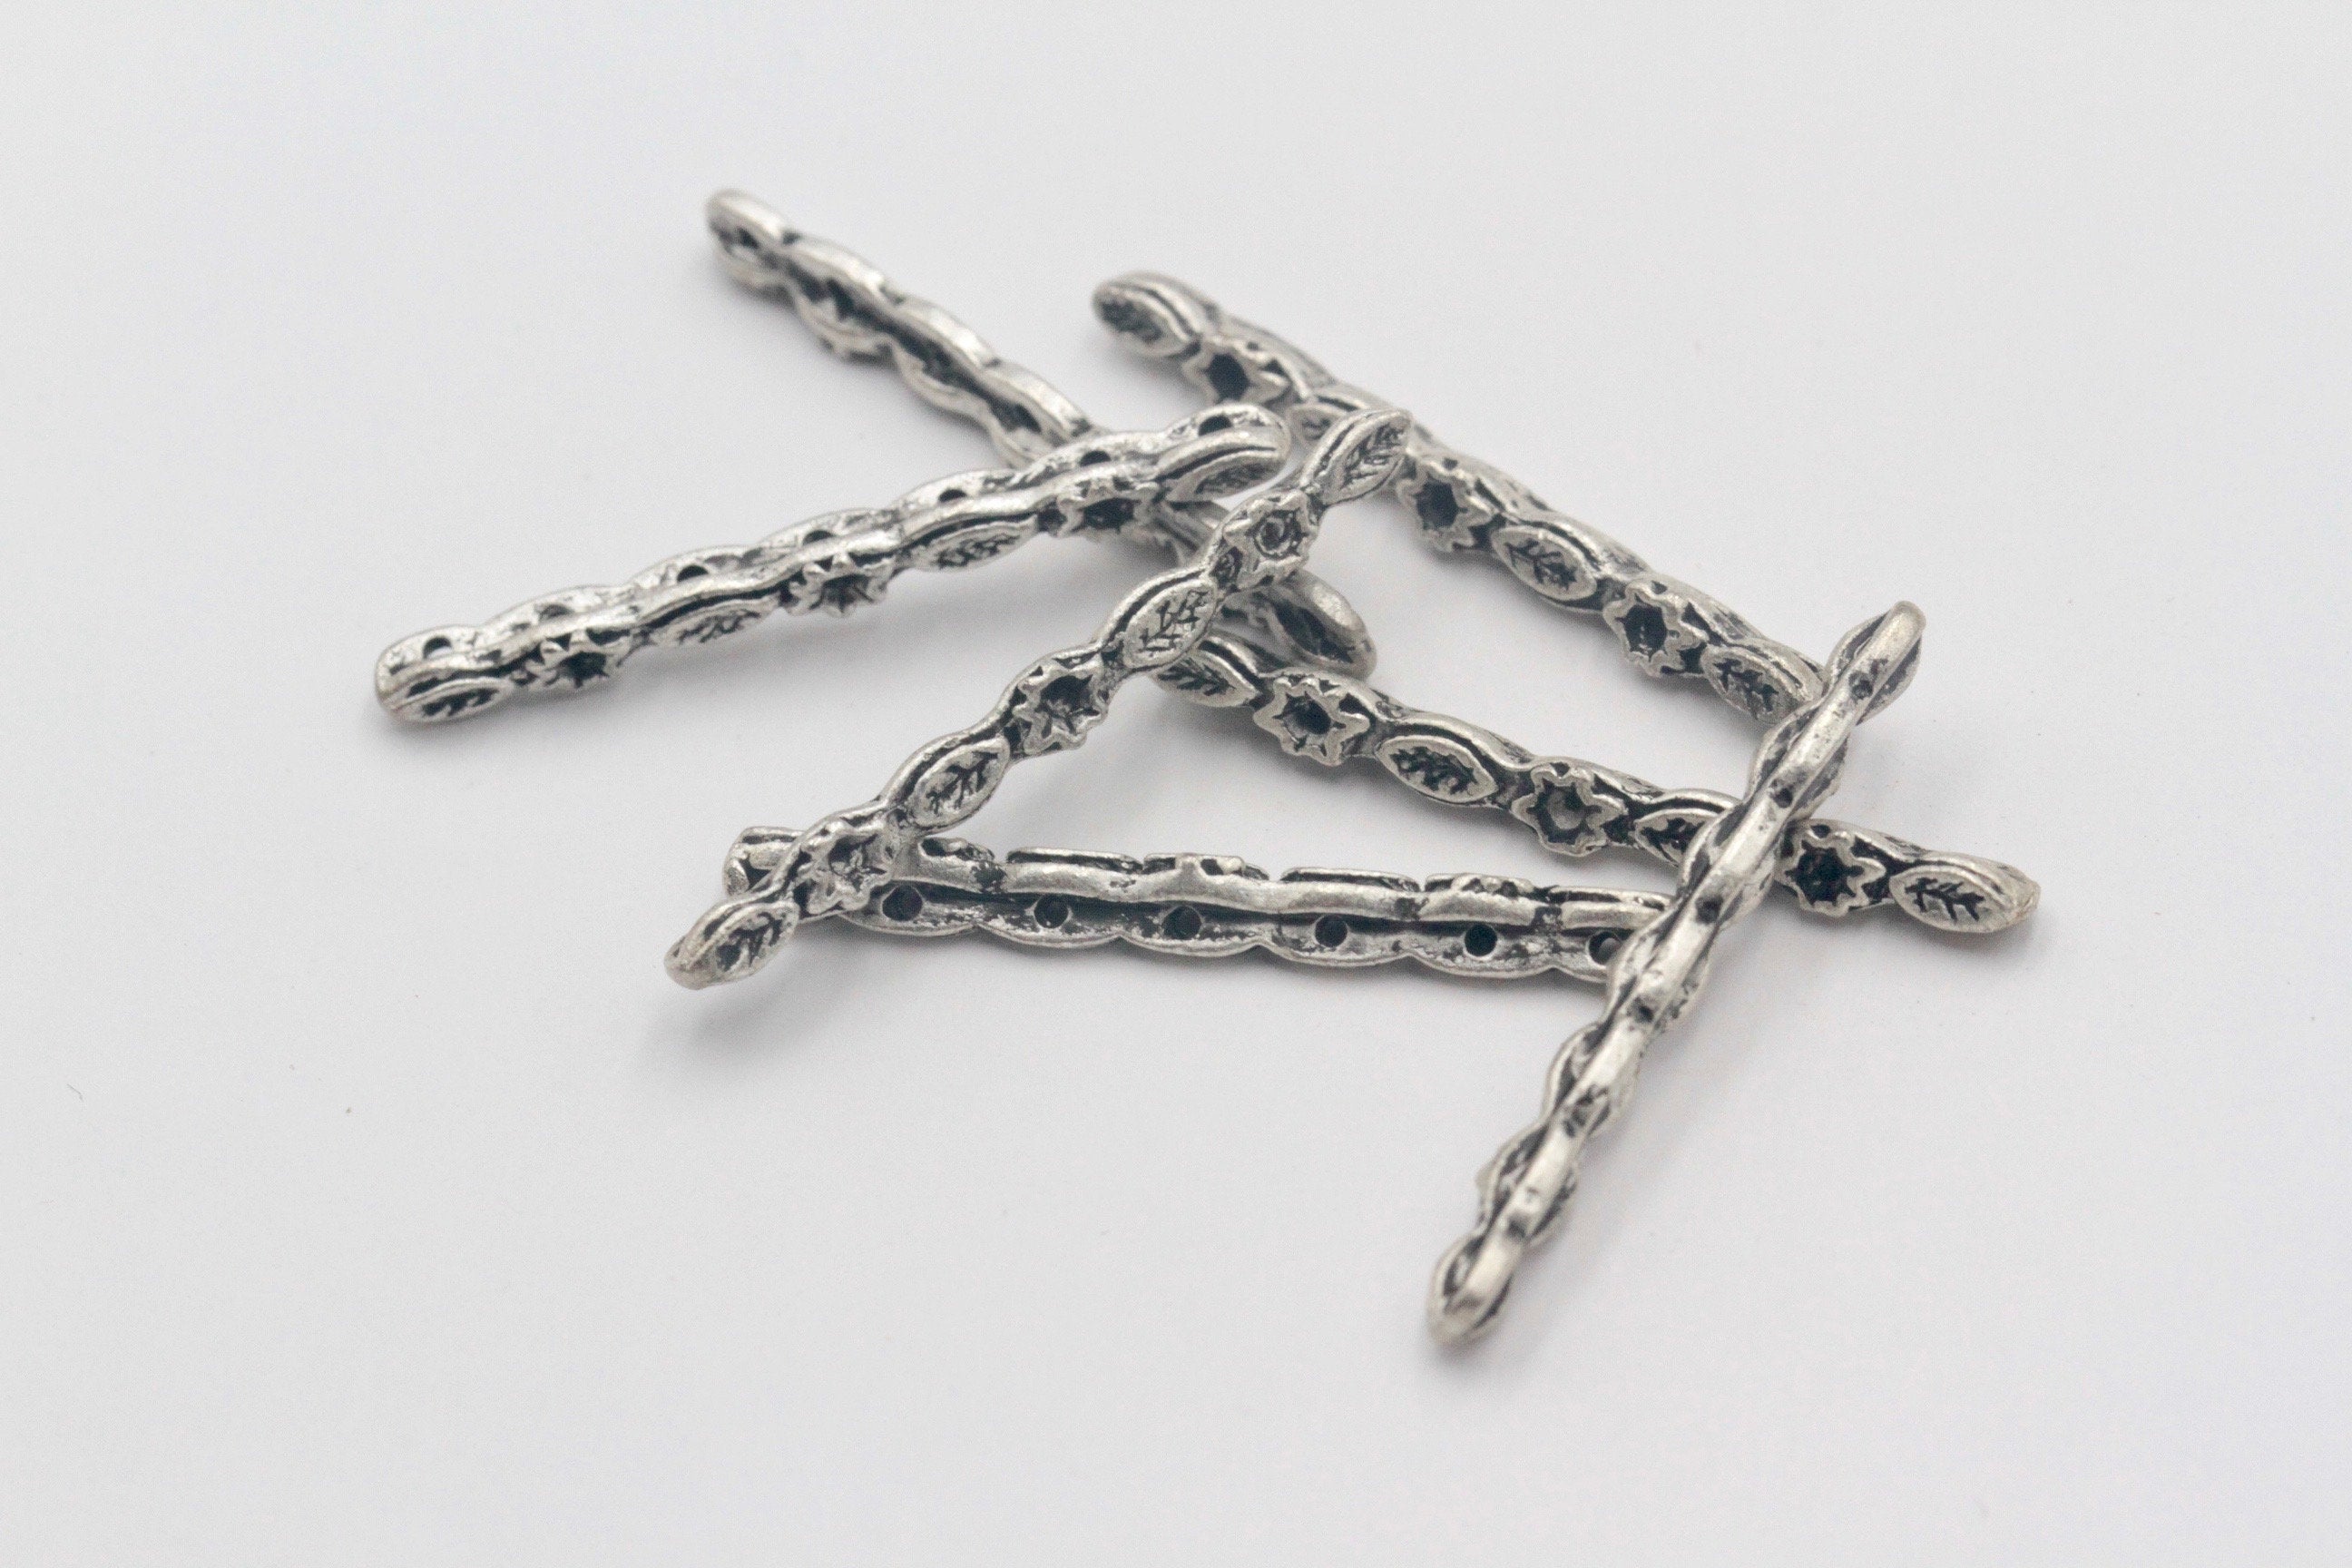 5pcs, 31mm x 3mm, Zinc Based Alloy 7 hole floral link in antiques silver